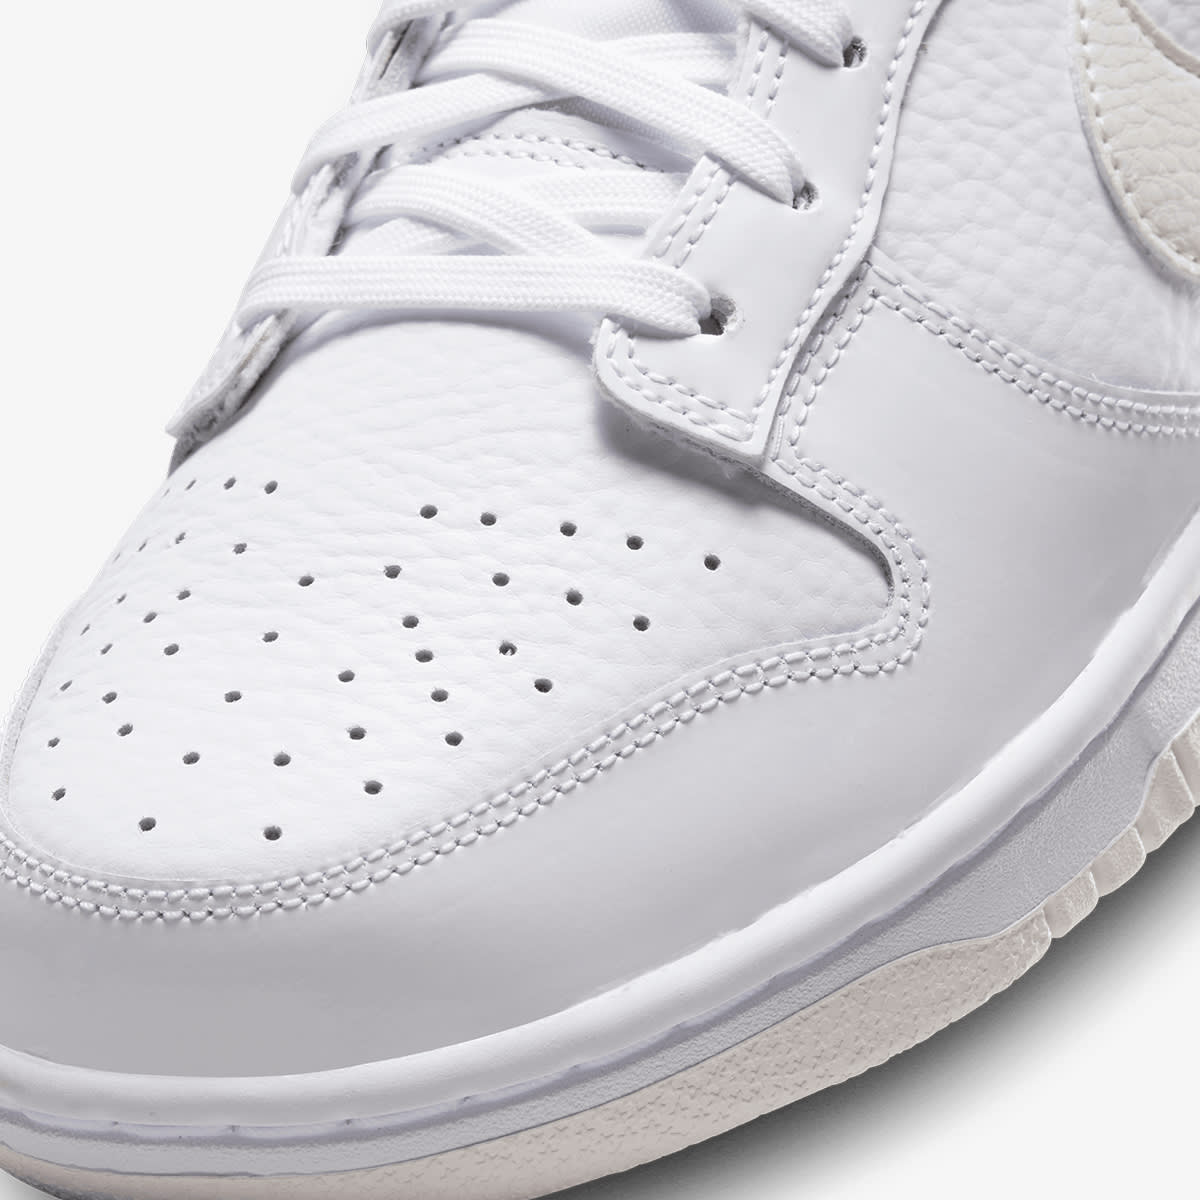 Nike Dunk Low W (White & Sail) | END. Launches